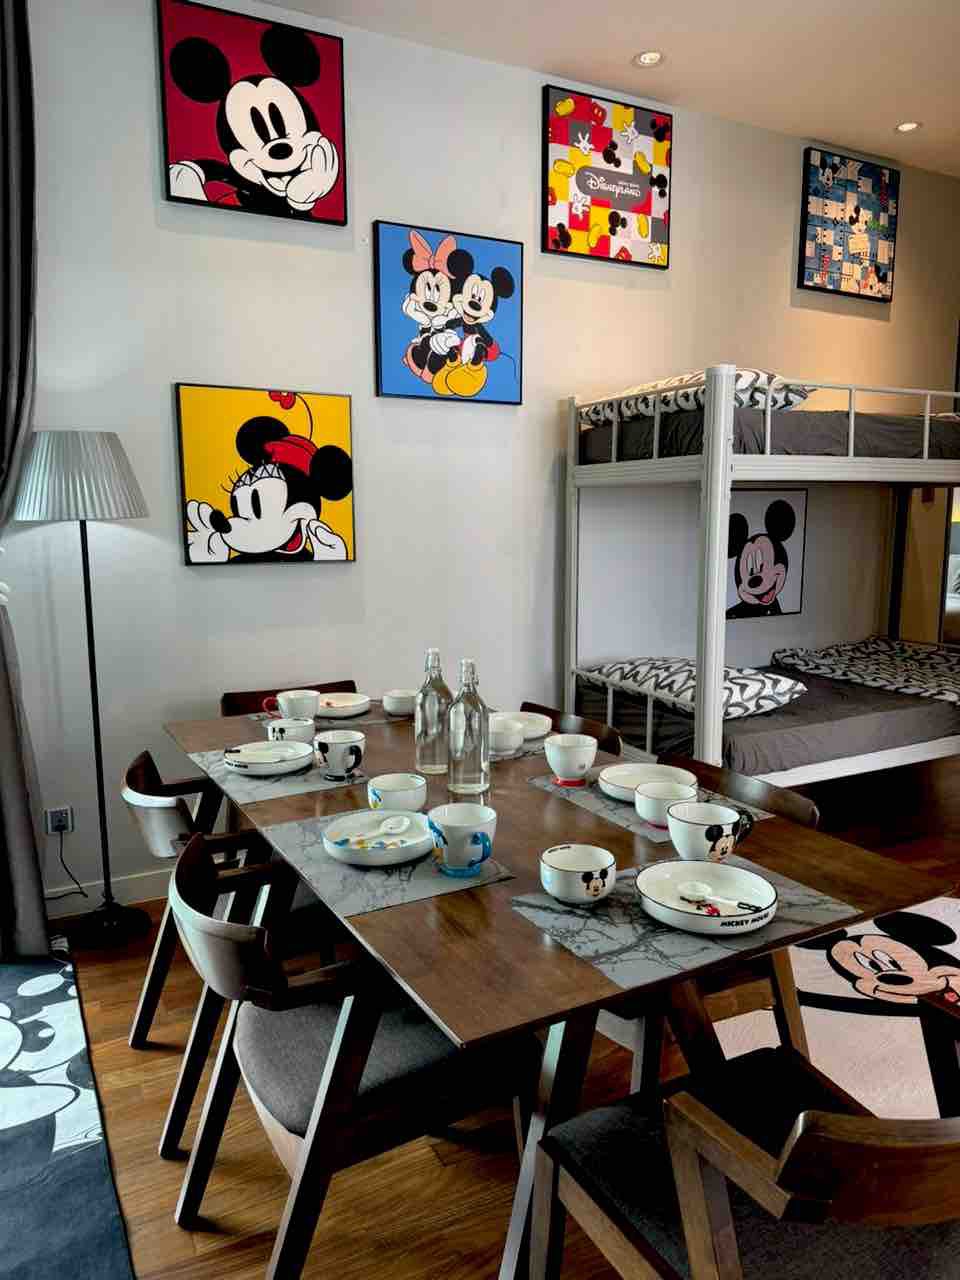 Mickey Mouse Residence 2 @ Geo38